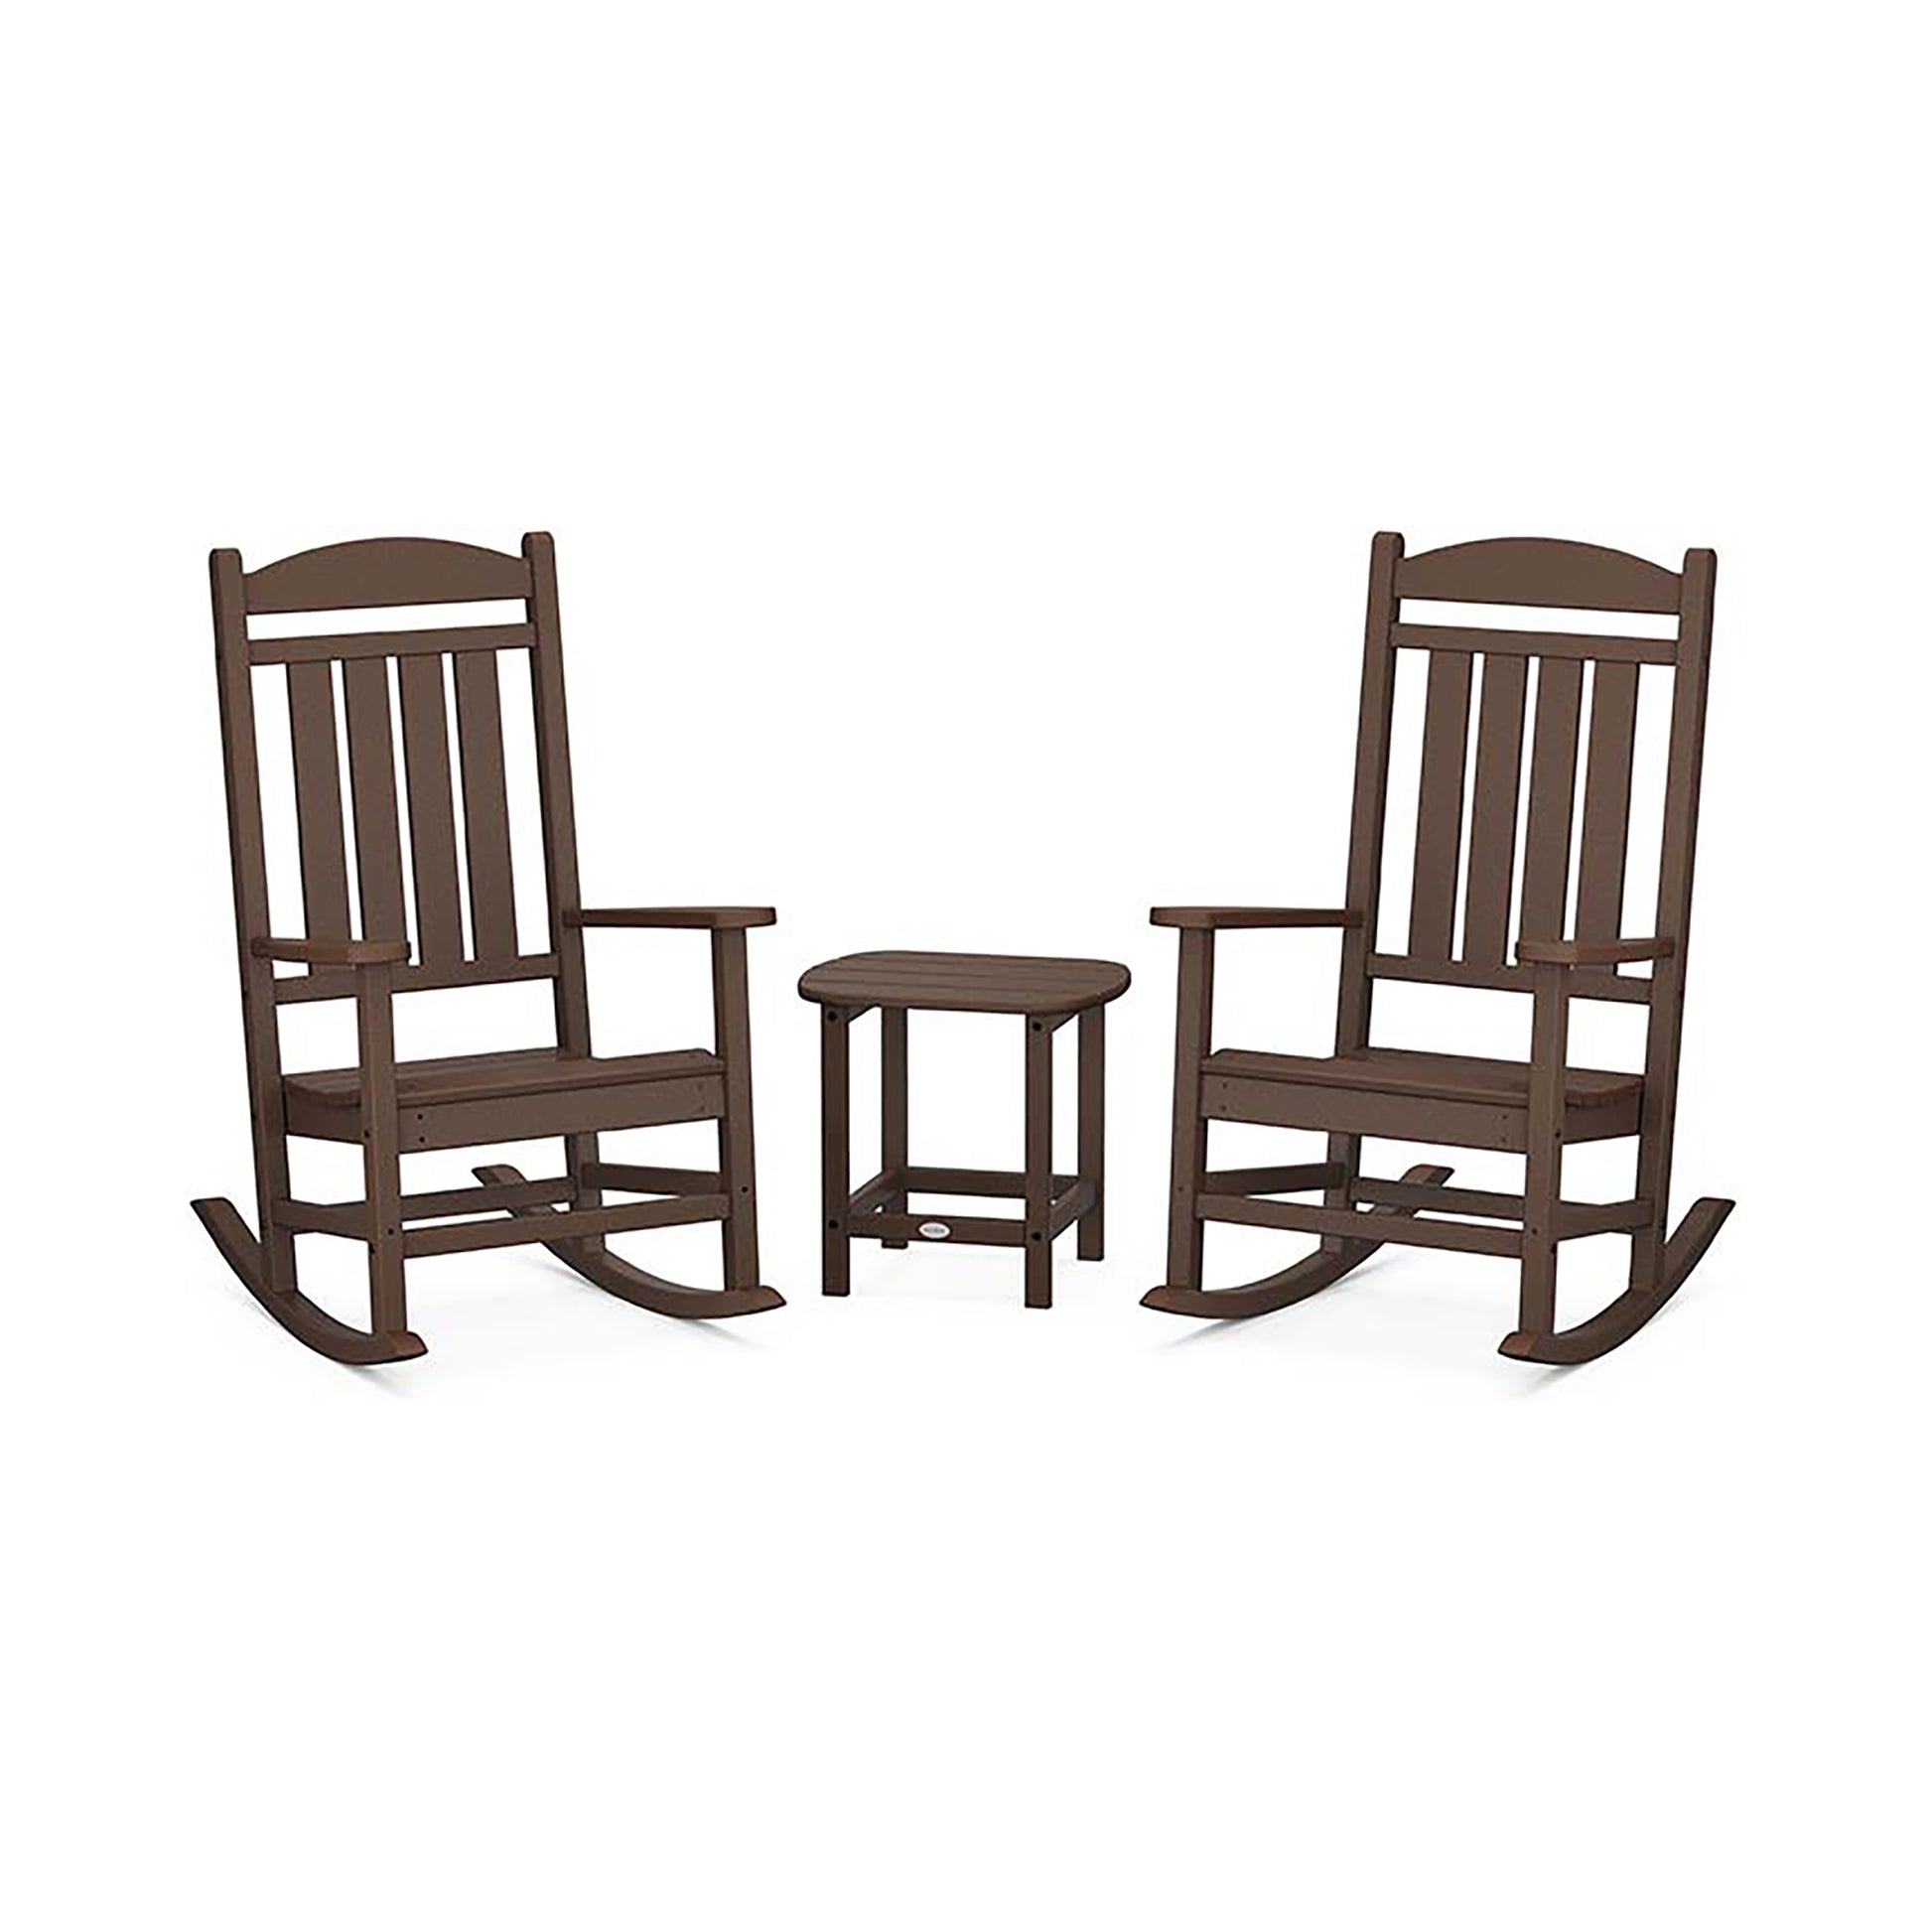 Two brown POLYWOOD Presidential Outdoor Rocking Chairs facing each other with a small round stool placed between them on a light background.